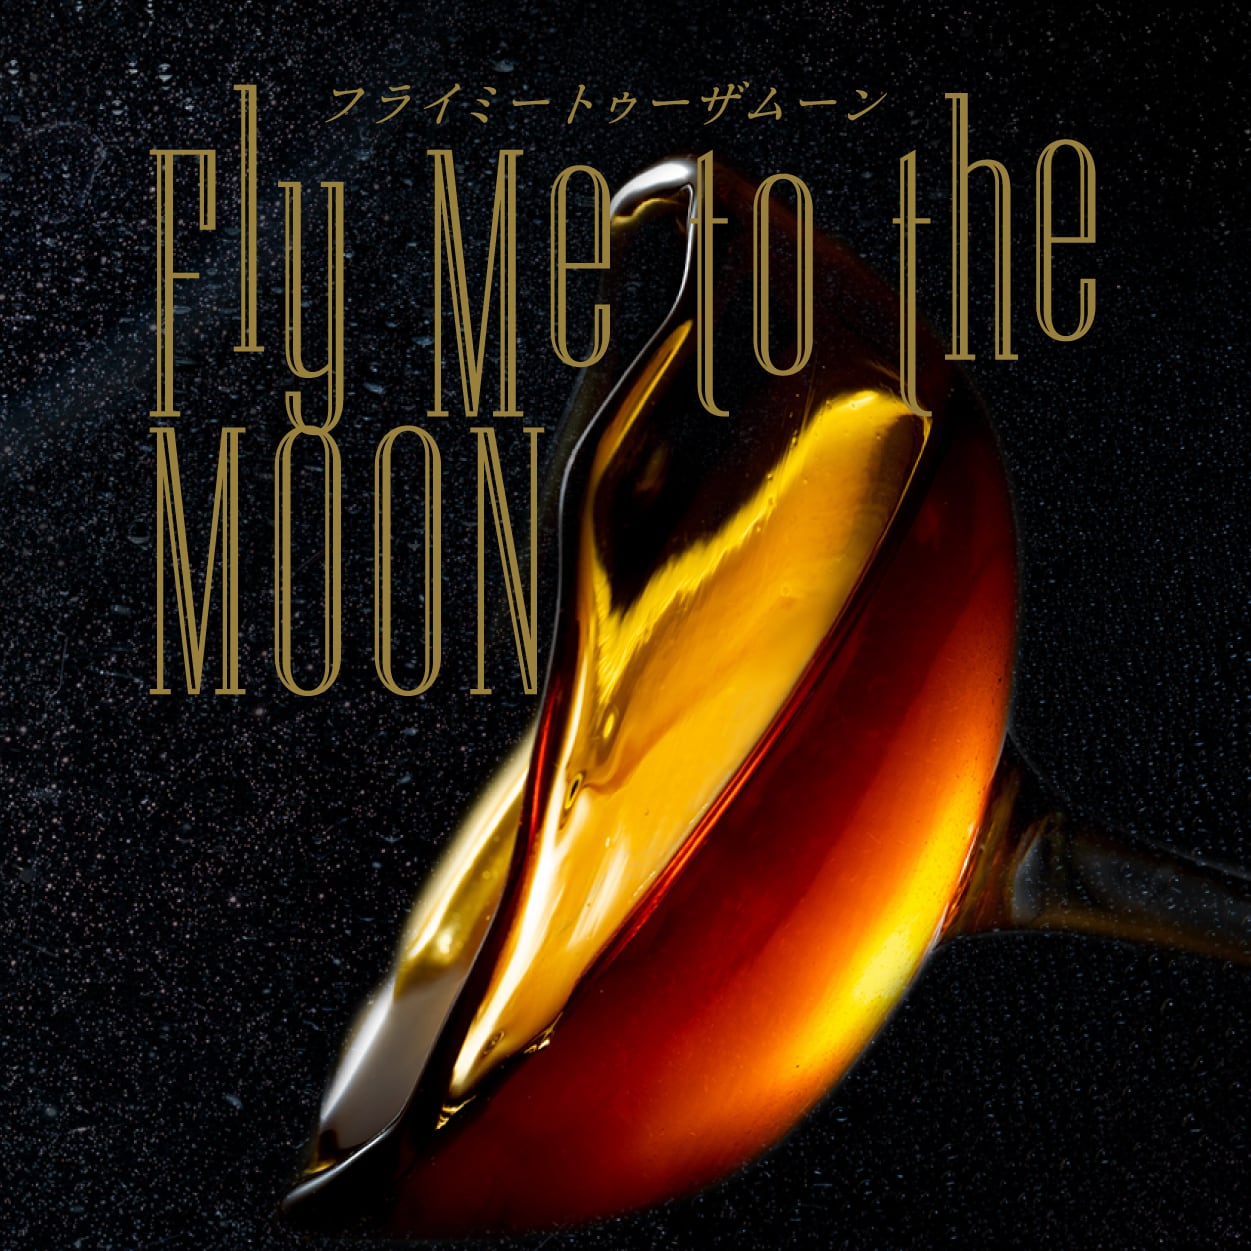 「 Fly Me to the Moon 」
緑茶と紅茶の甘みブレンド